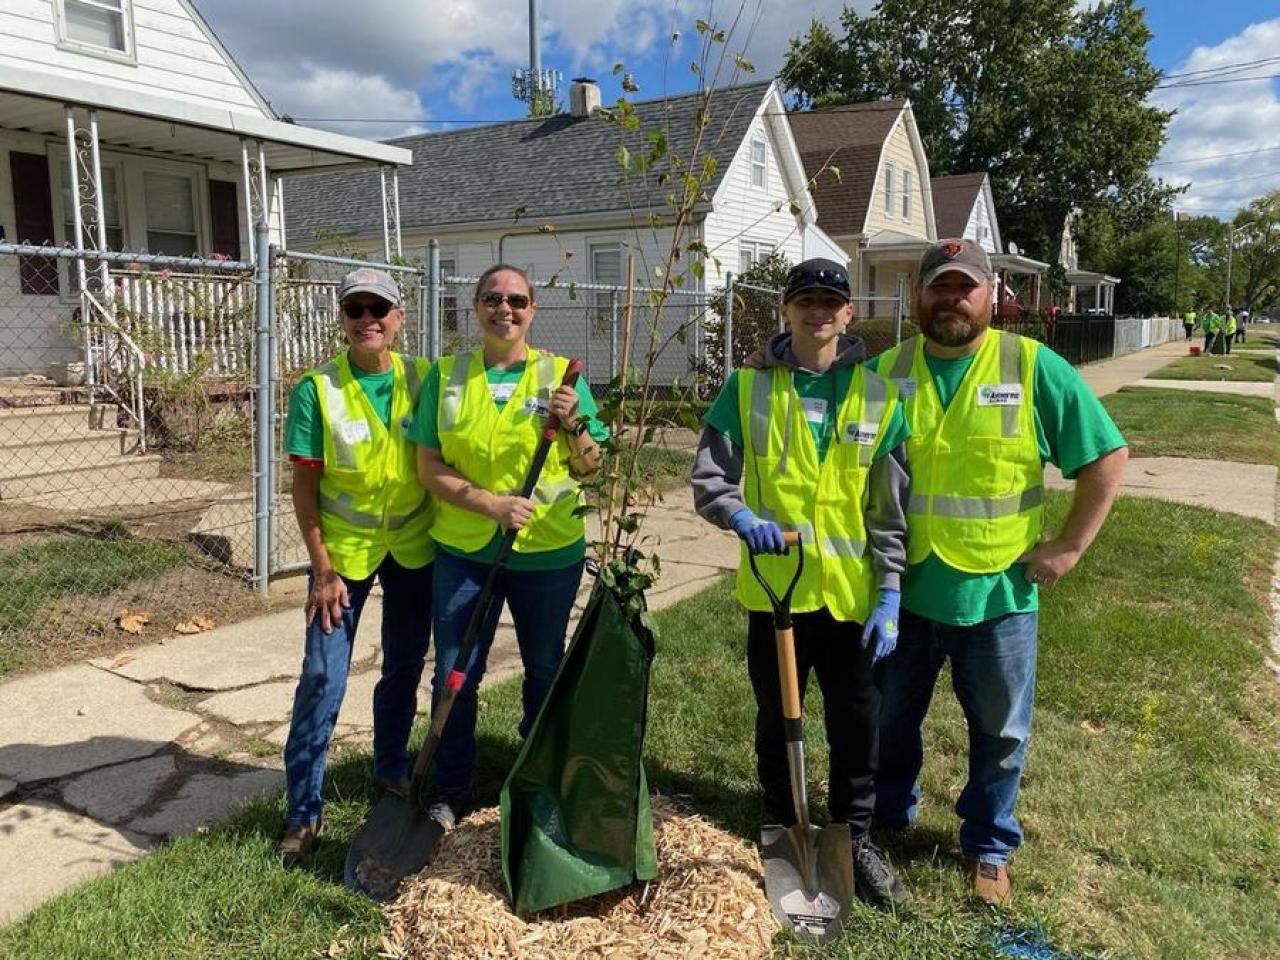 Leidos team members helped plant 100 trees in Peoria, IL in partnership with Trees Forever, the City of Peoria, and the Peoria Park District.